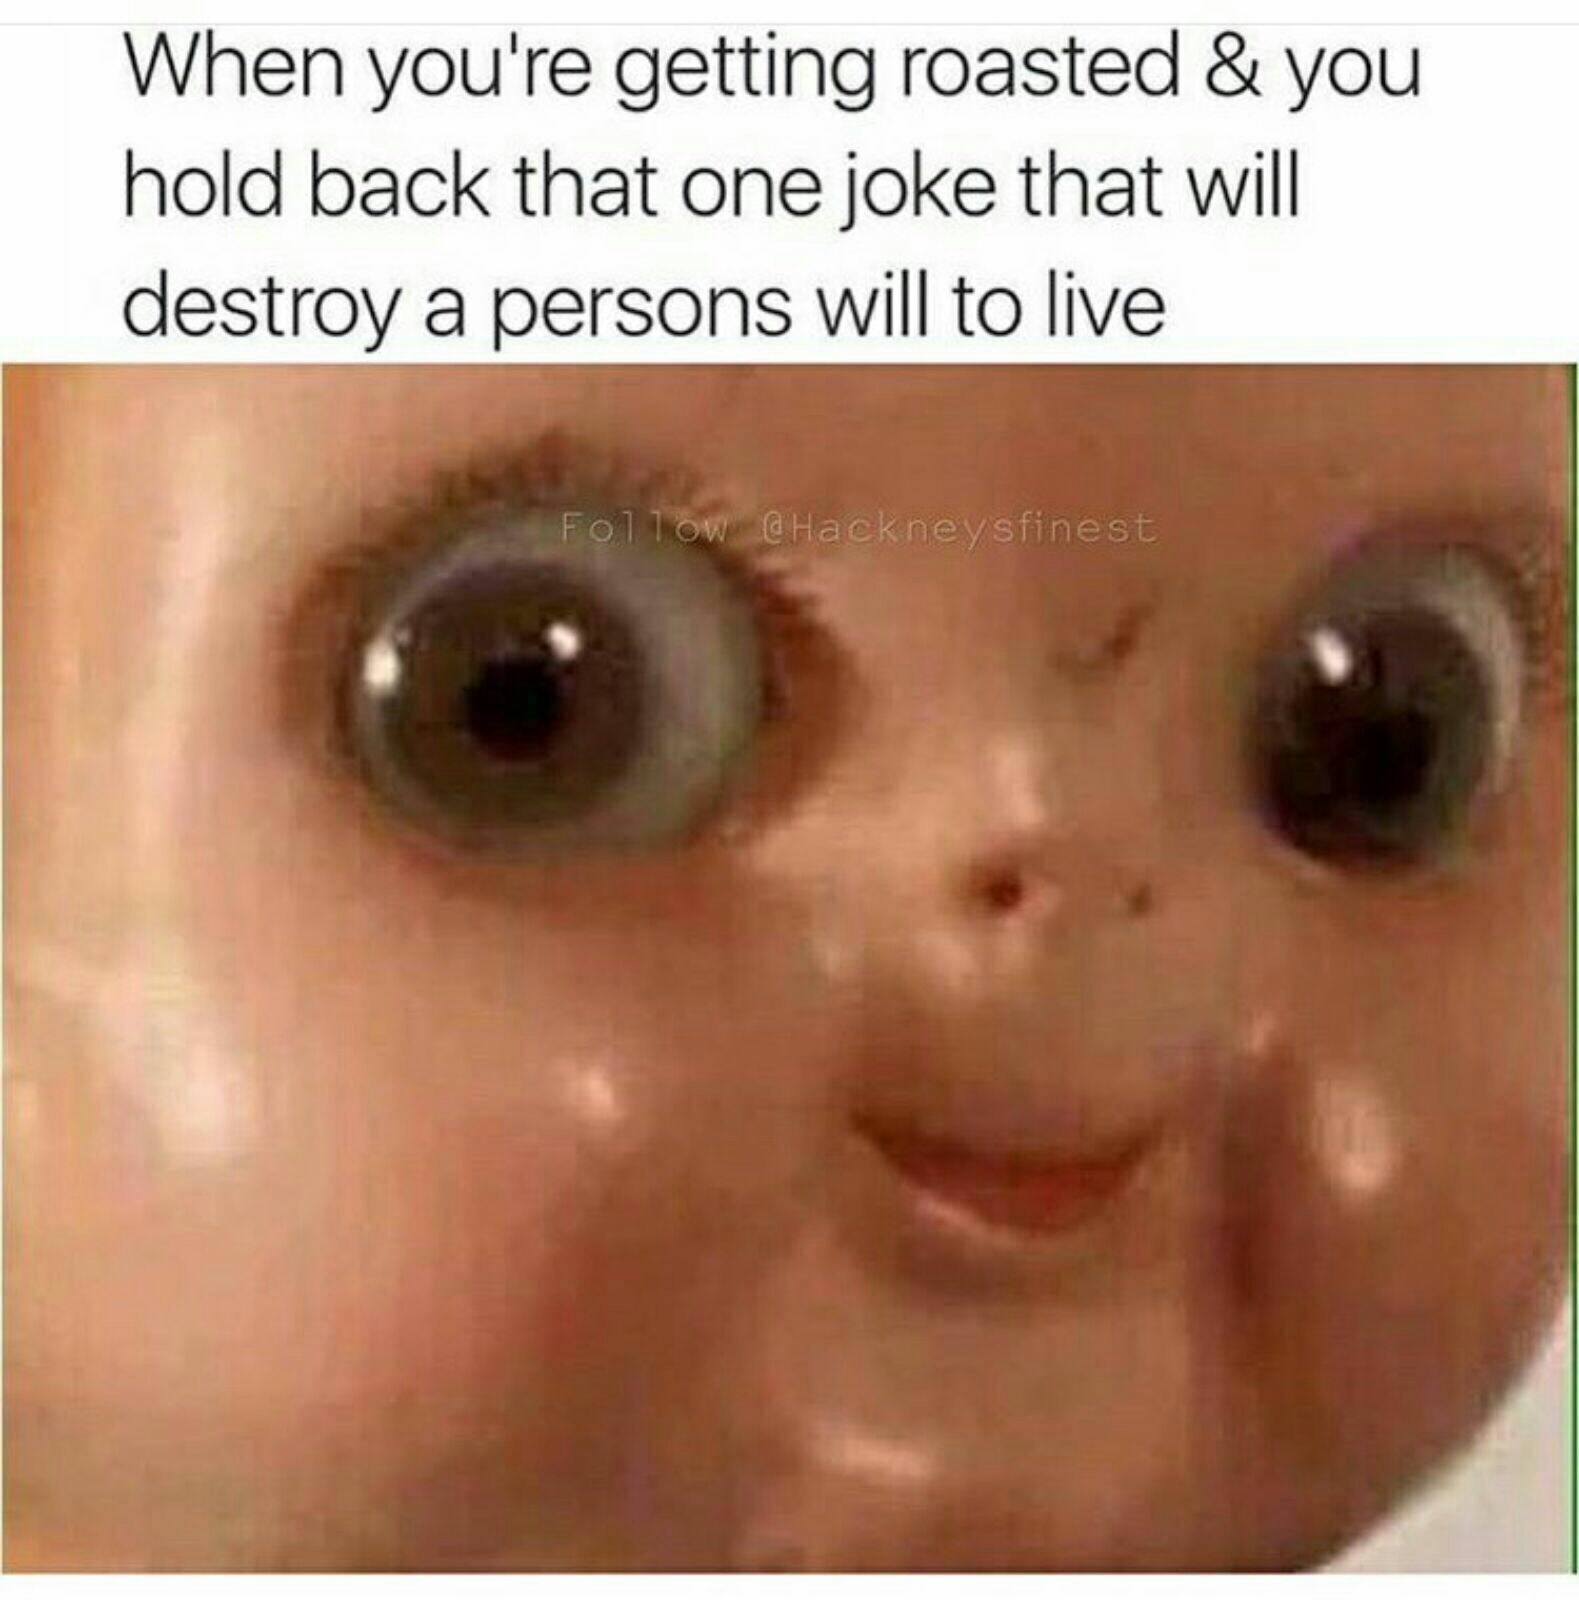 when you're getting roasted - meme